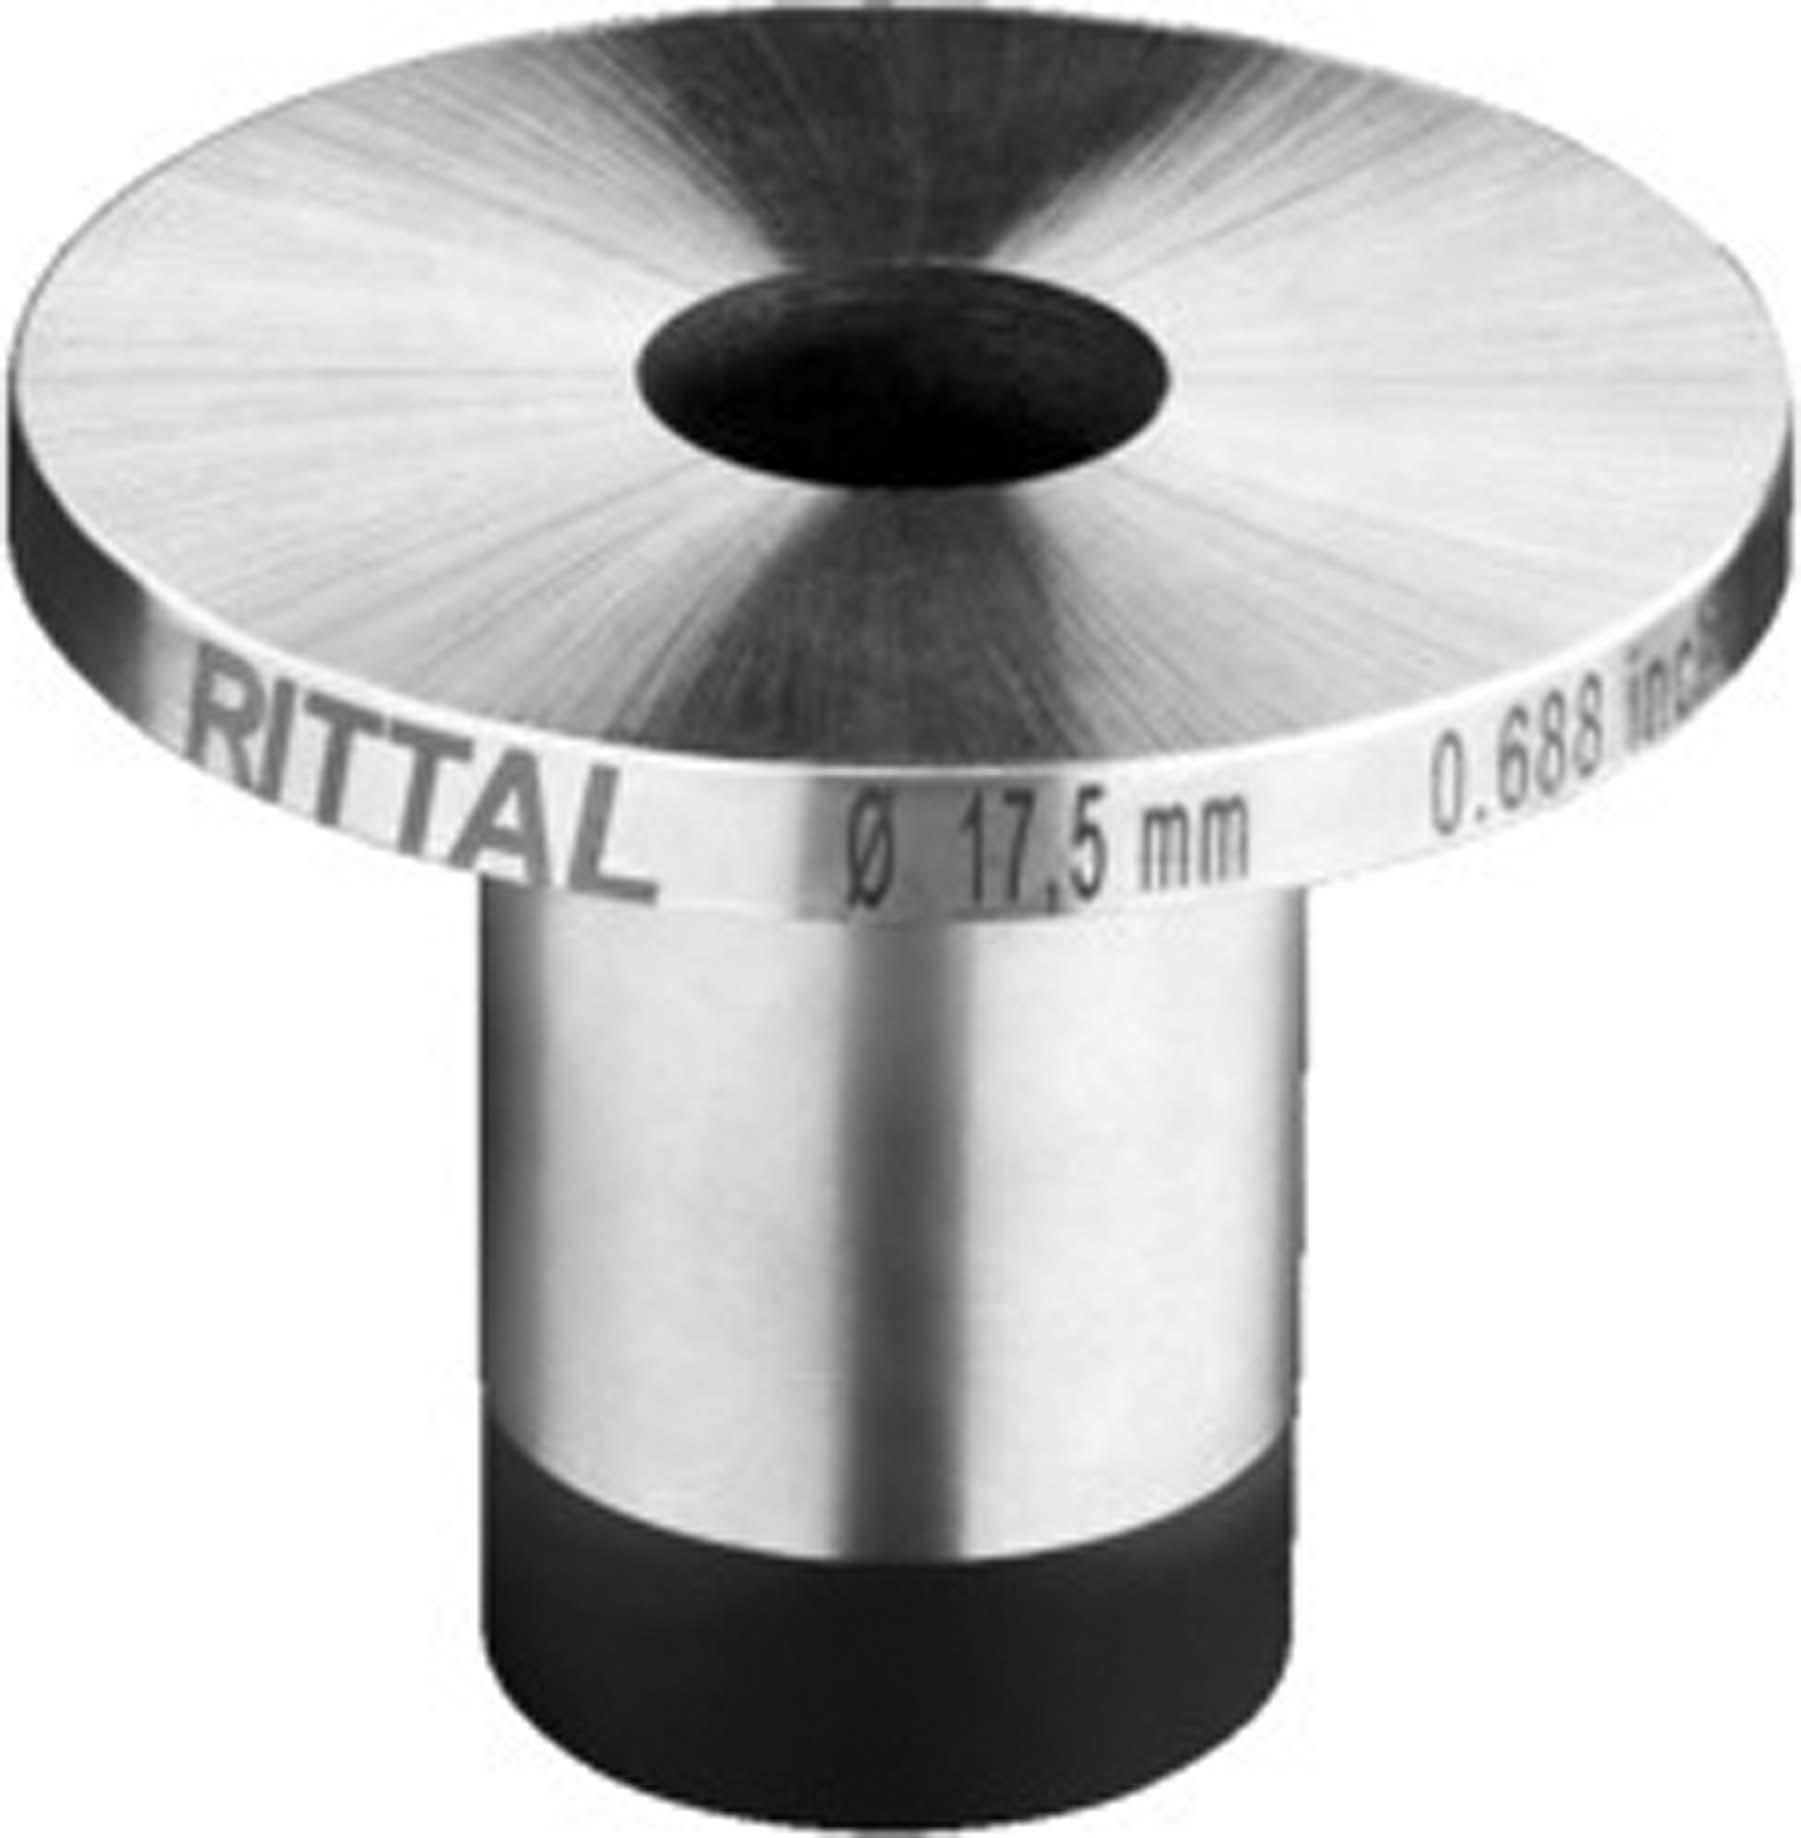 Rittal - Matrice ronde 11,5 mm gamme automation systems